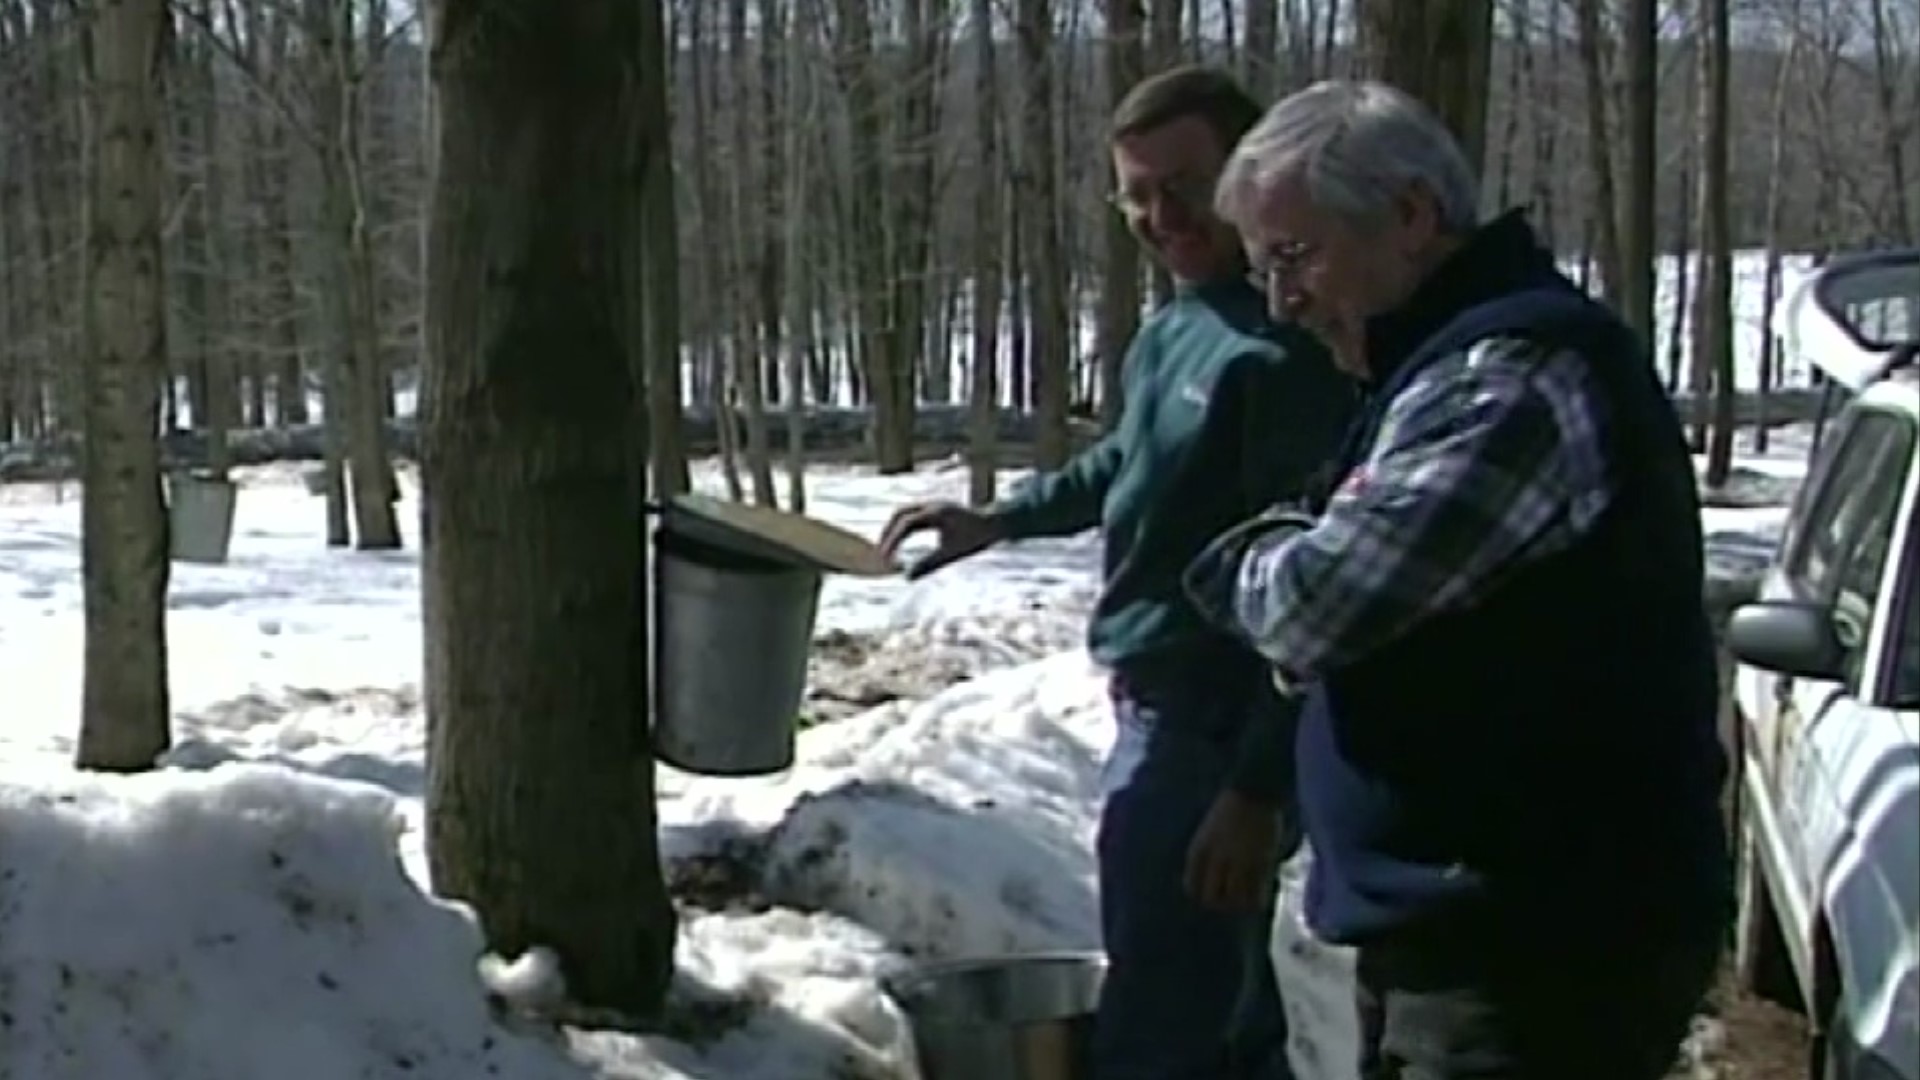 Turning maple sap into maple syrup is a custom that has occupied generation after generation.